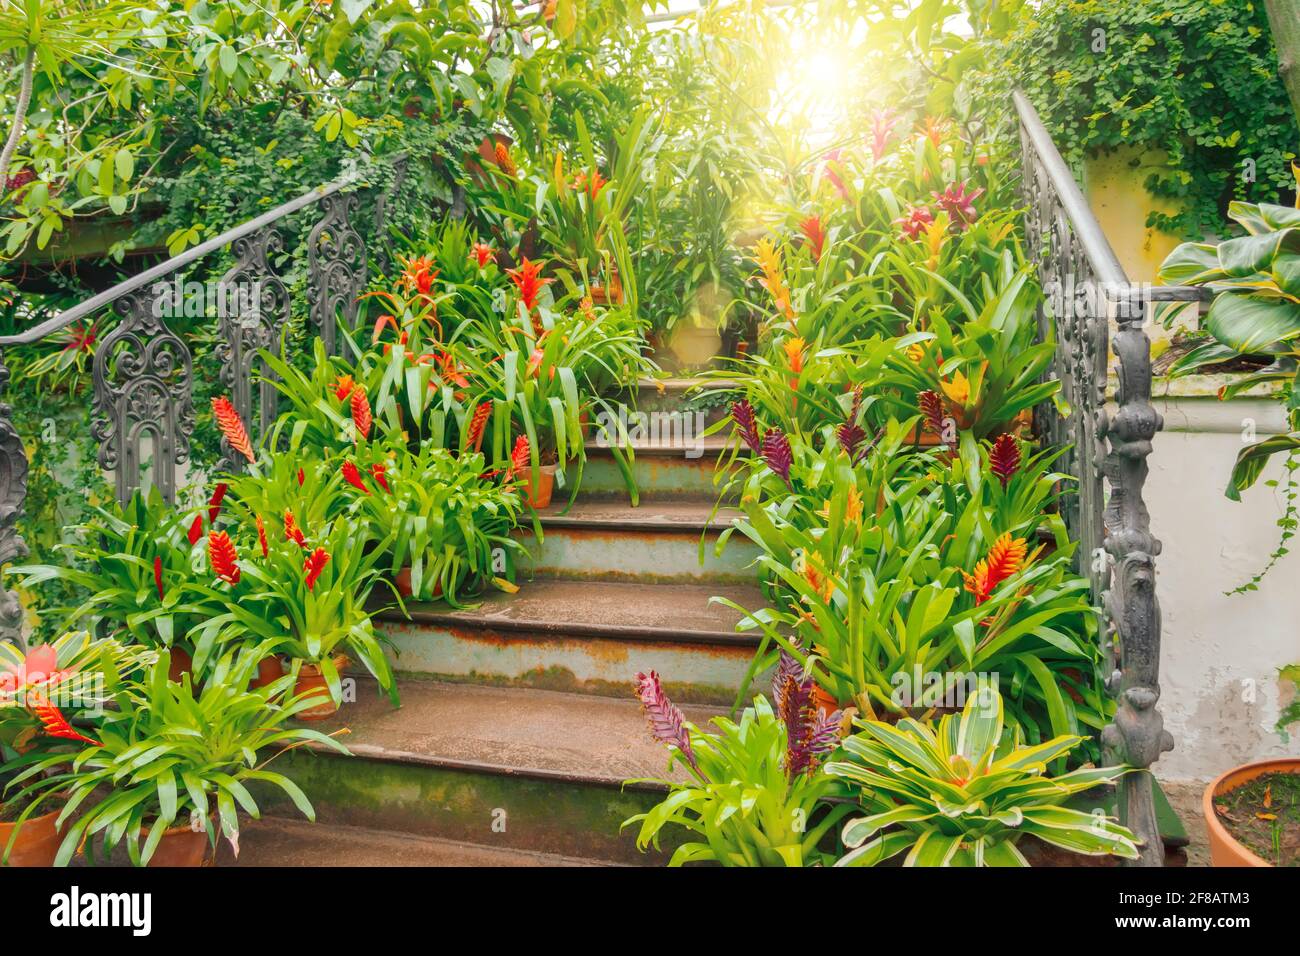 Plants of tropical raw bromeliad forest on display on an ancient staircase in a greenhouse garden Stock Photo